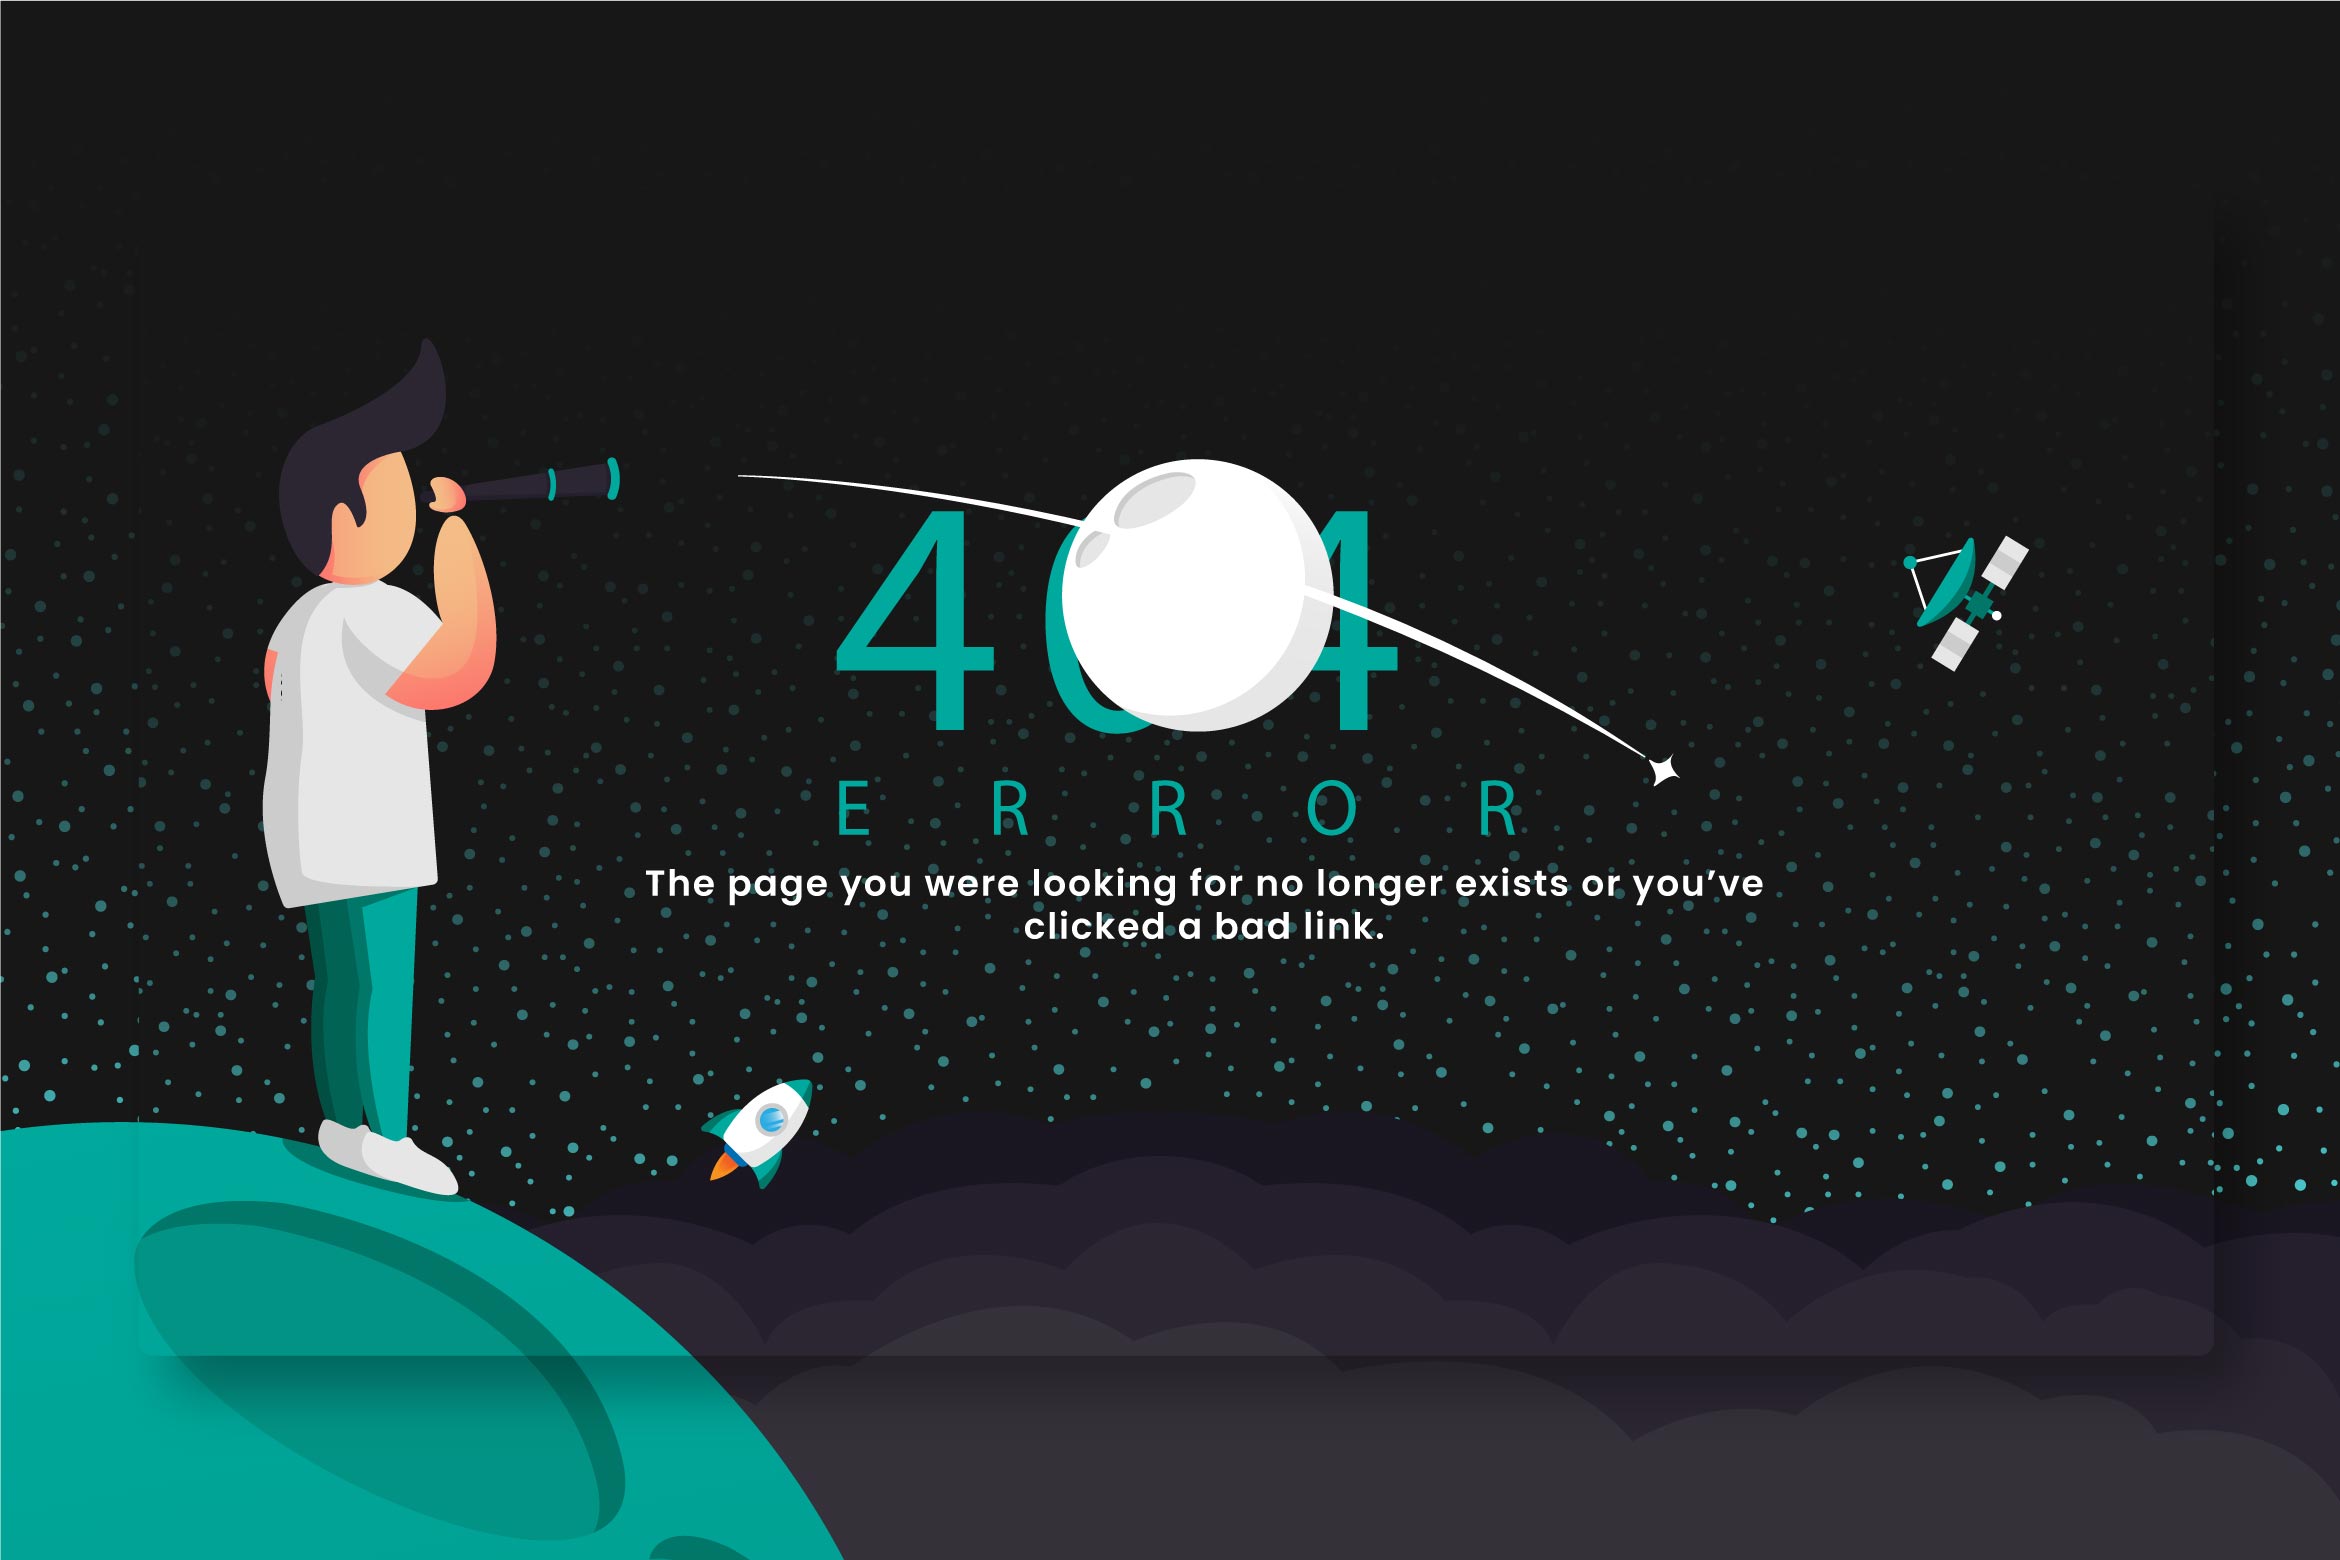 404 error: The page you were looking for no longer exists or you’ve clicked a bad link.